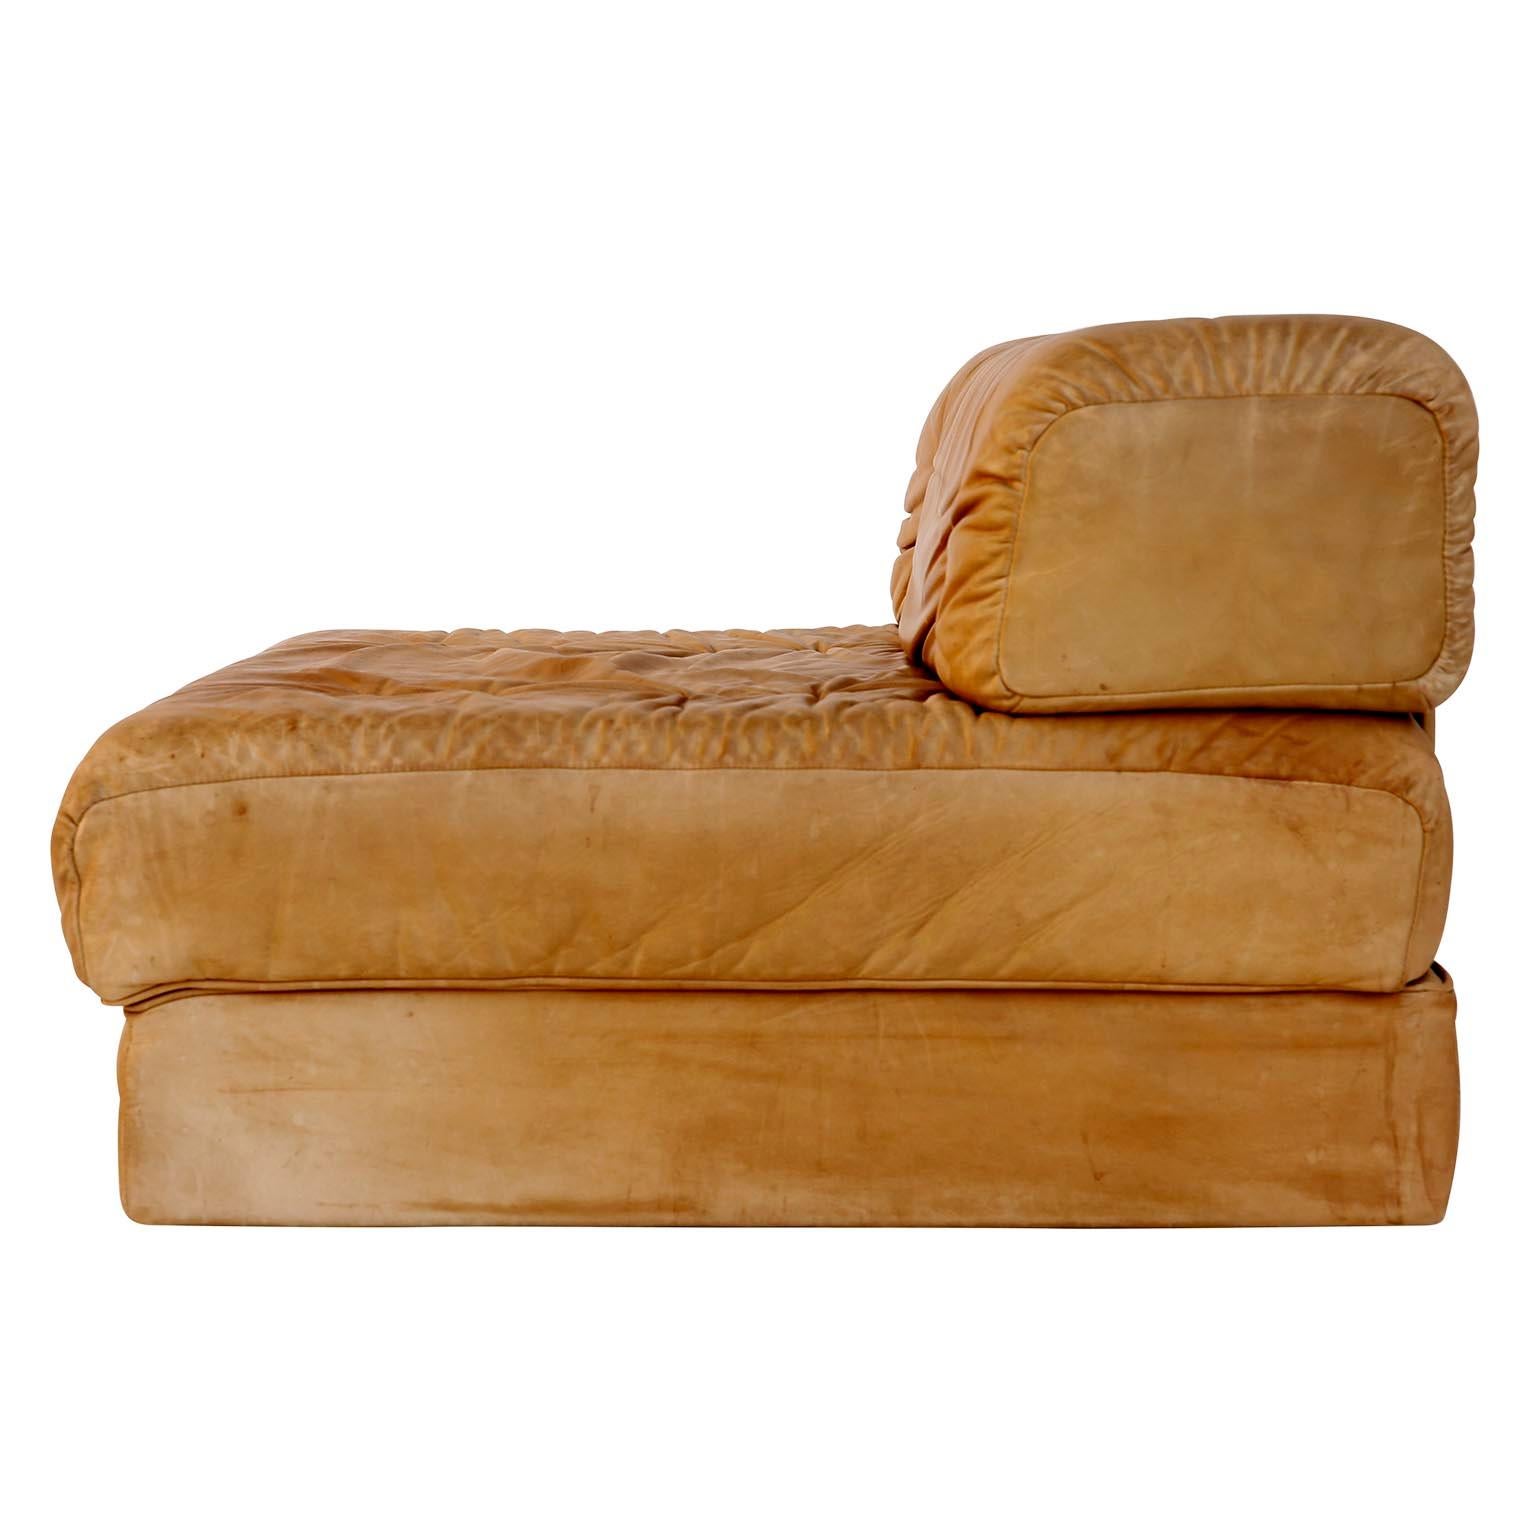 Pair of Chairs Convertable Bed Daybed Sofa 'Atrium', Wittmann, Cognac Leather 1